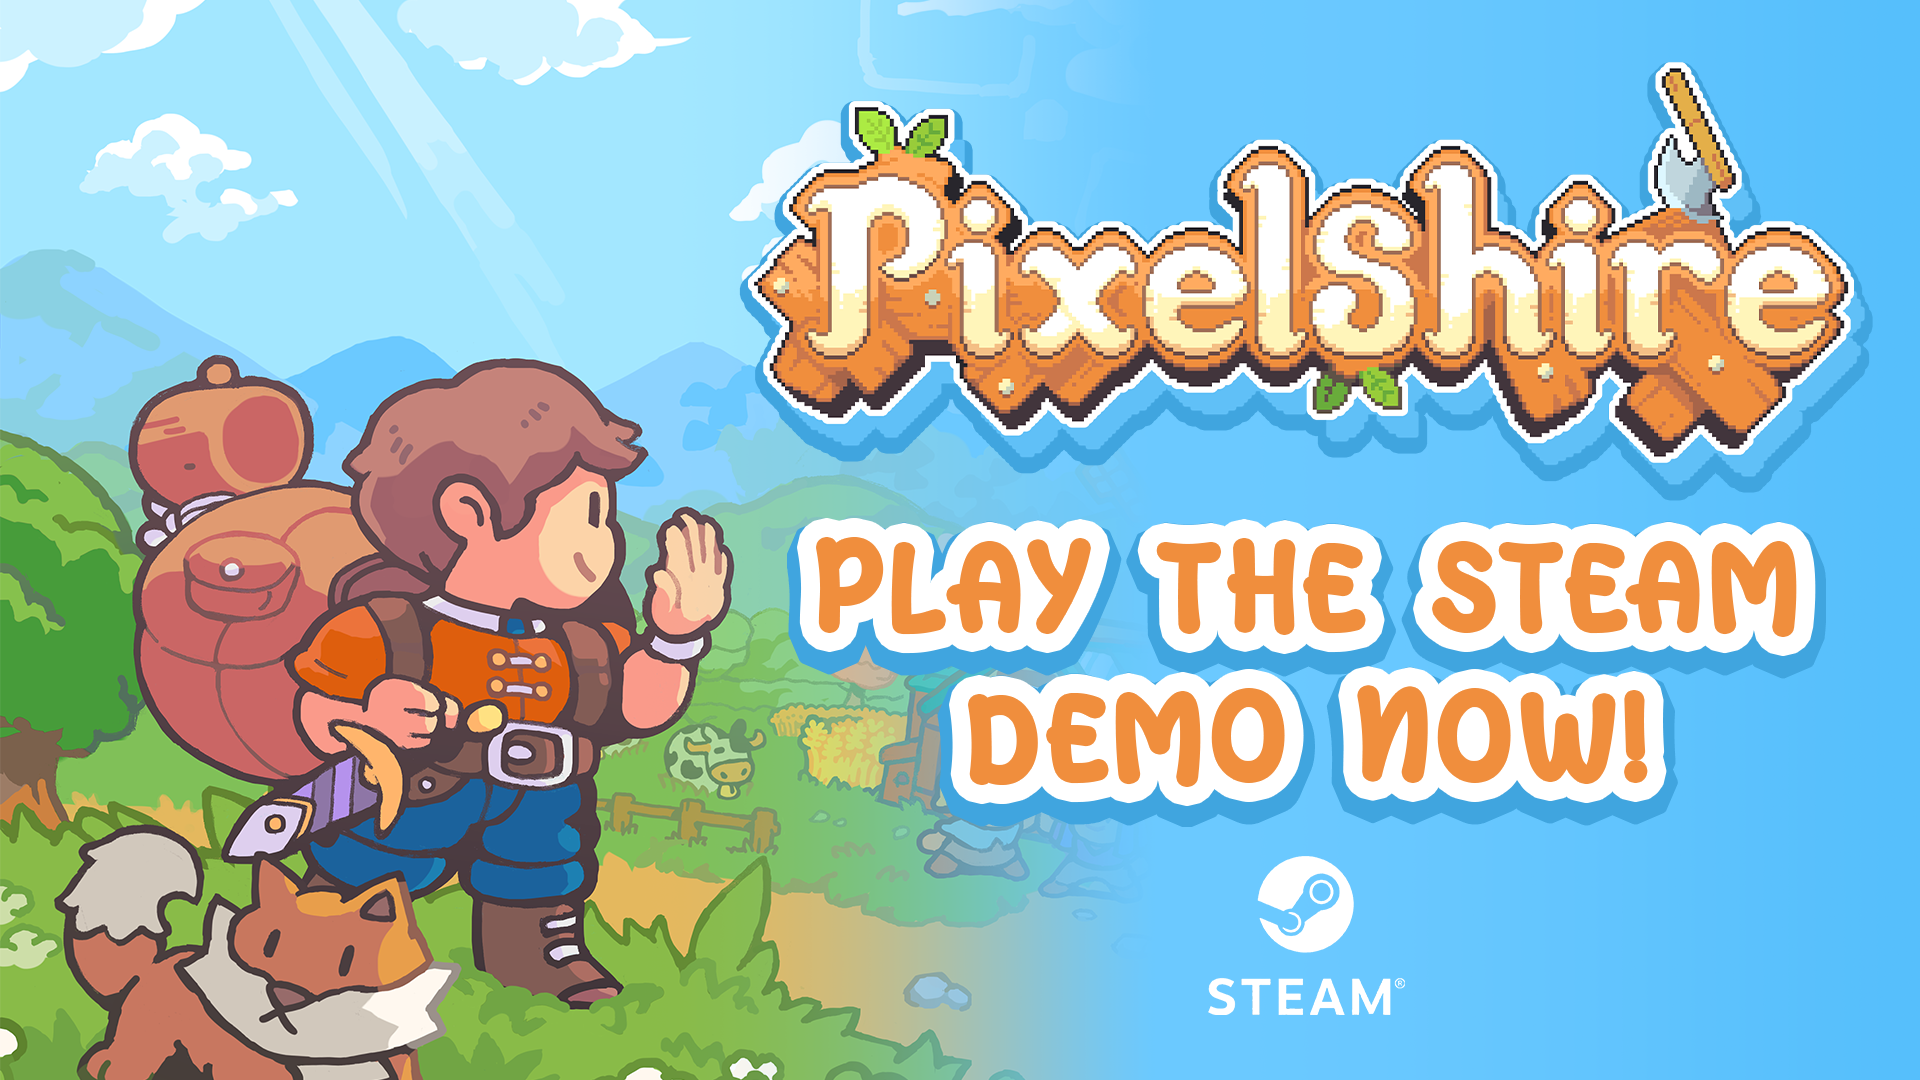 Pixelshire Demo - Available Now!